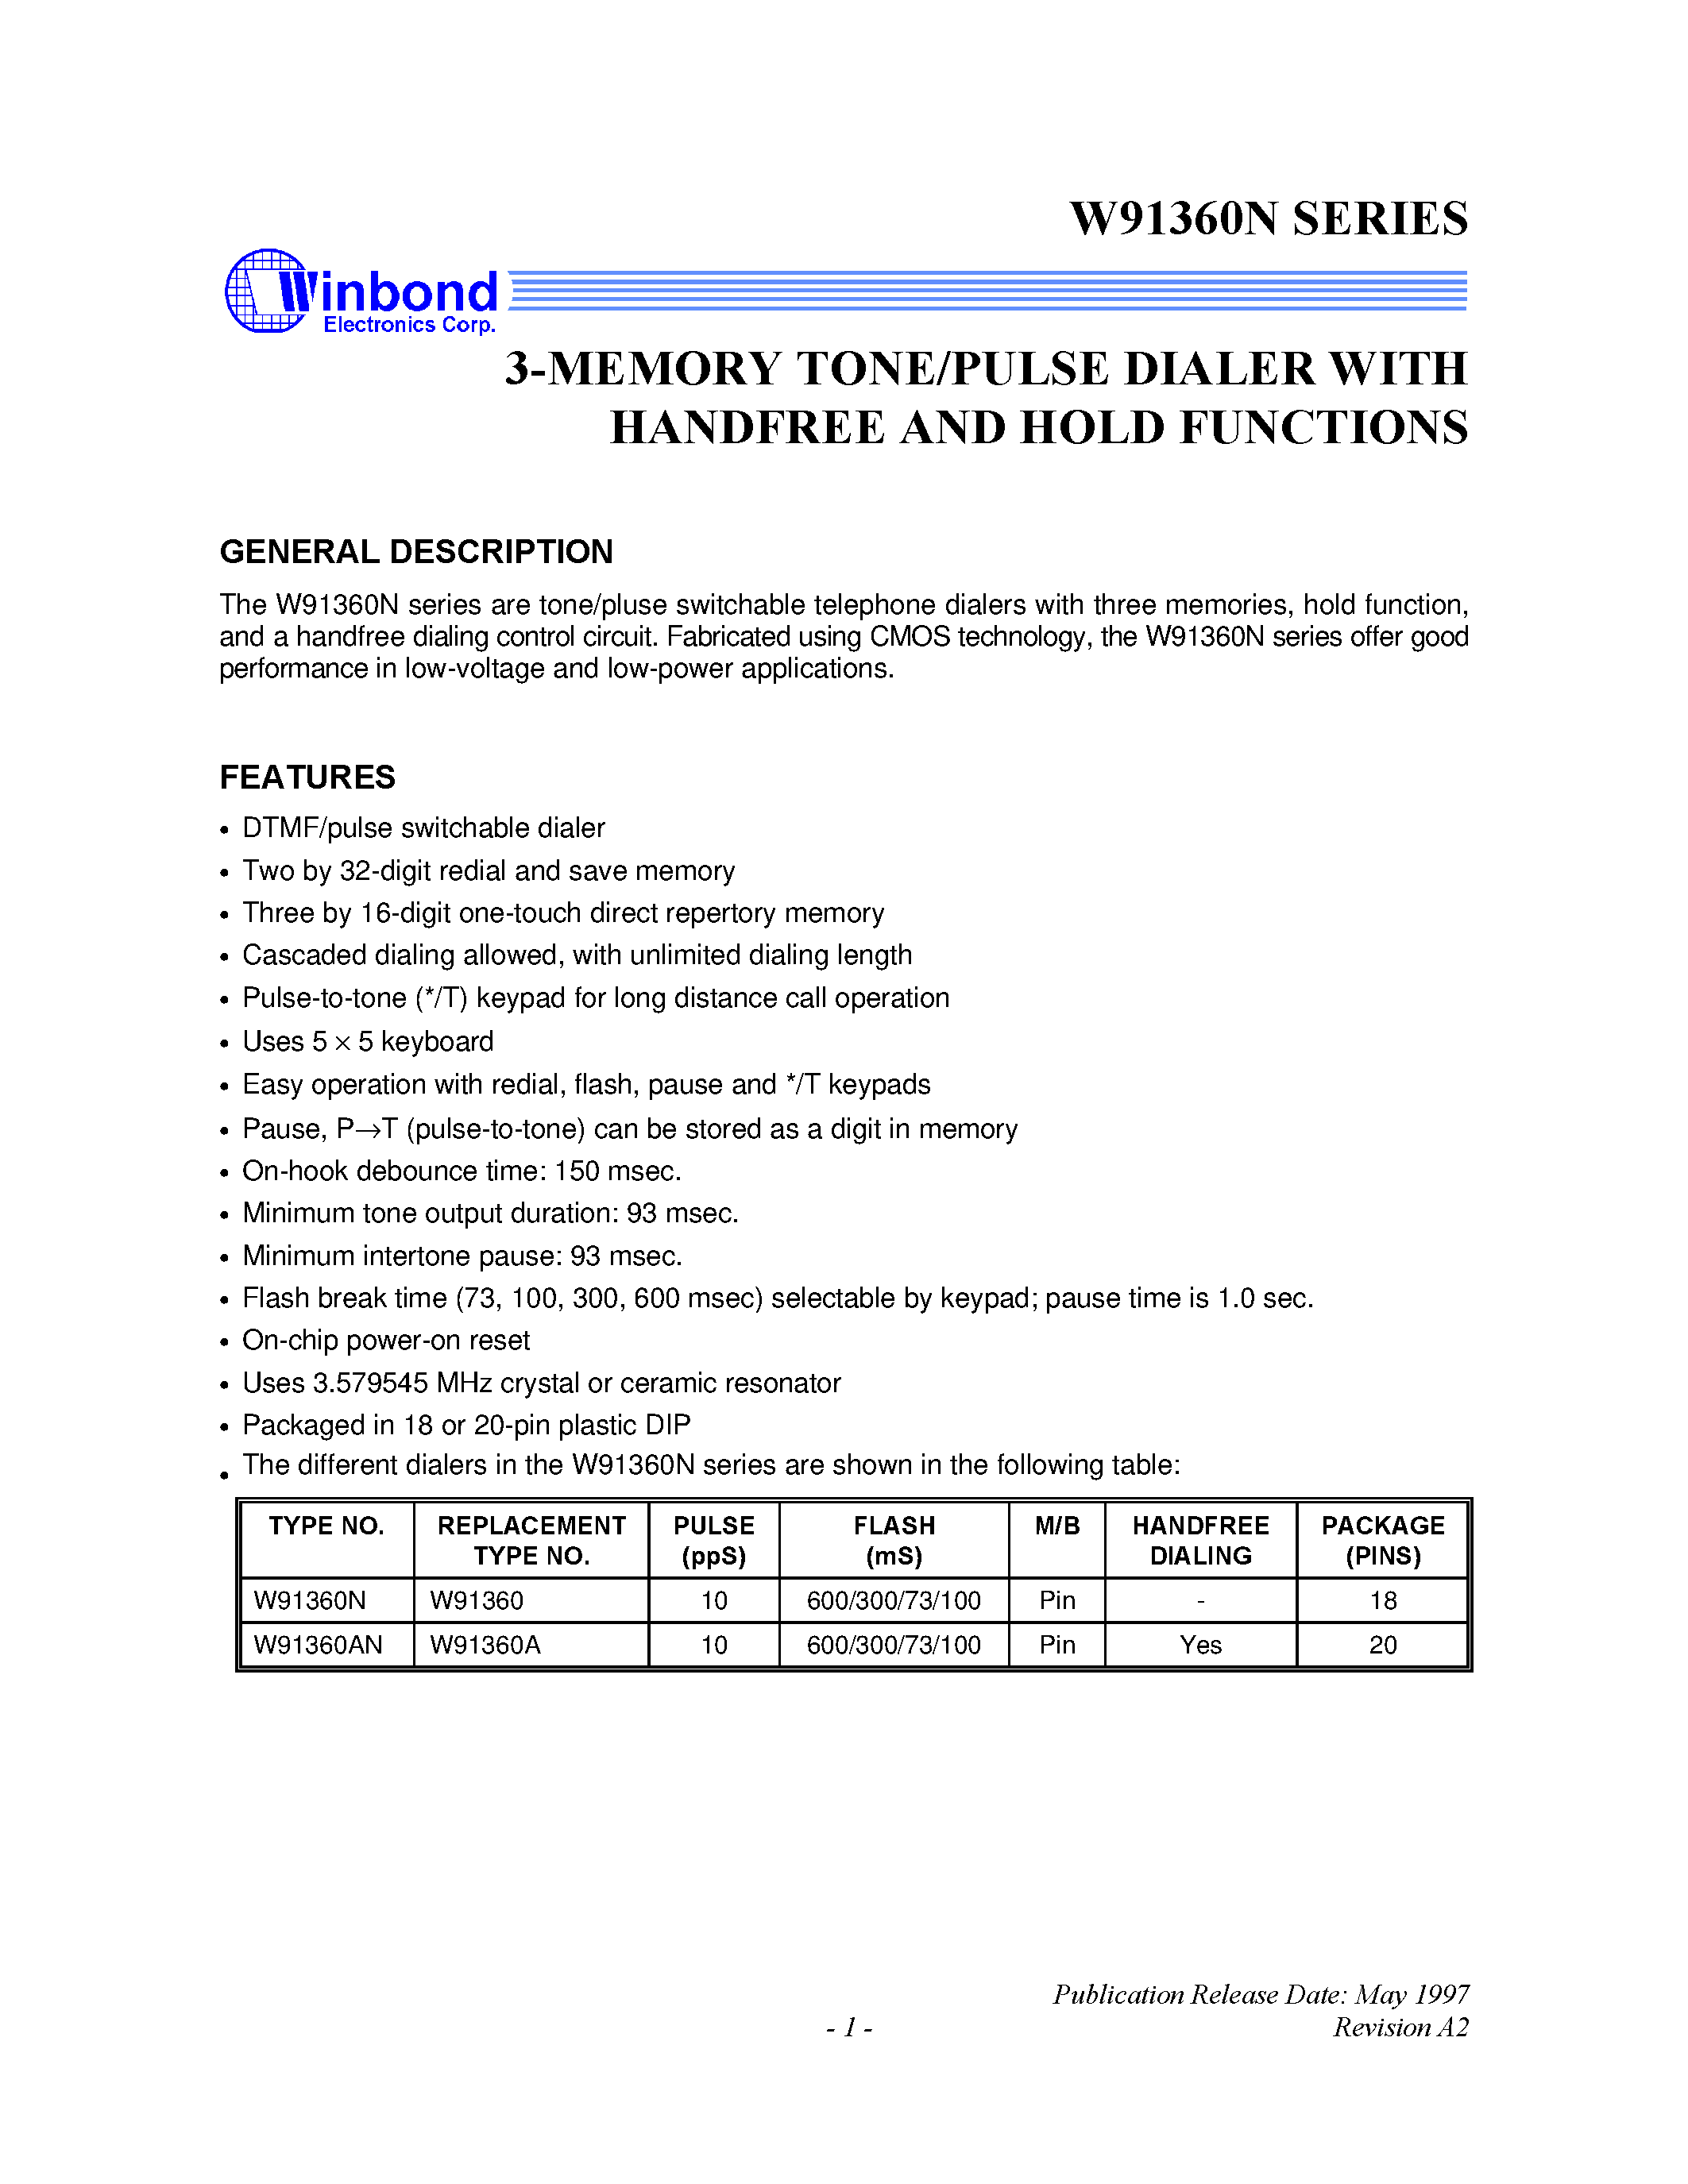 Datasheet W91360N - 3-MEMORY TONE/PULSE DIALER WITH HANDFREE AND HOLD FUNCTION page 1